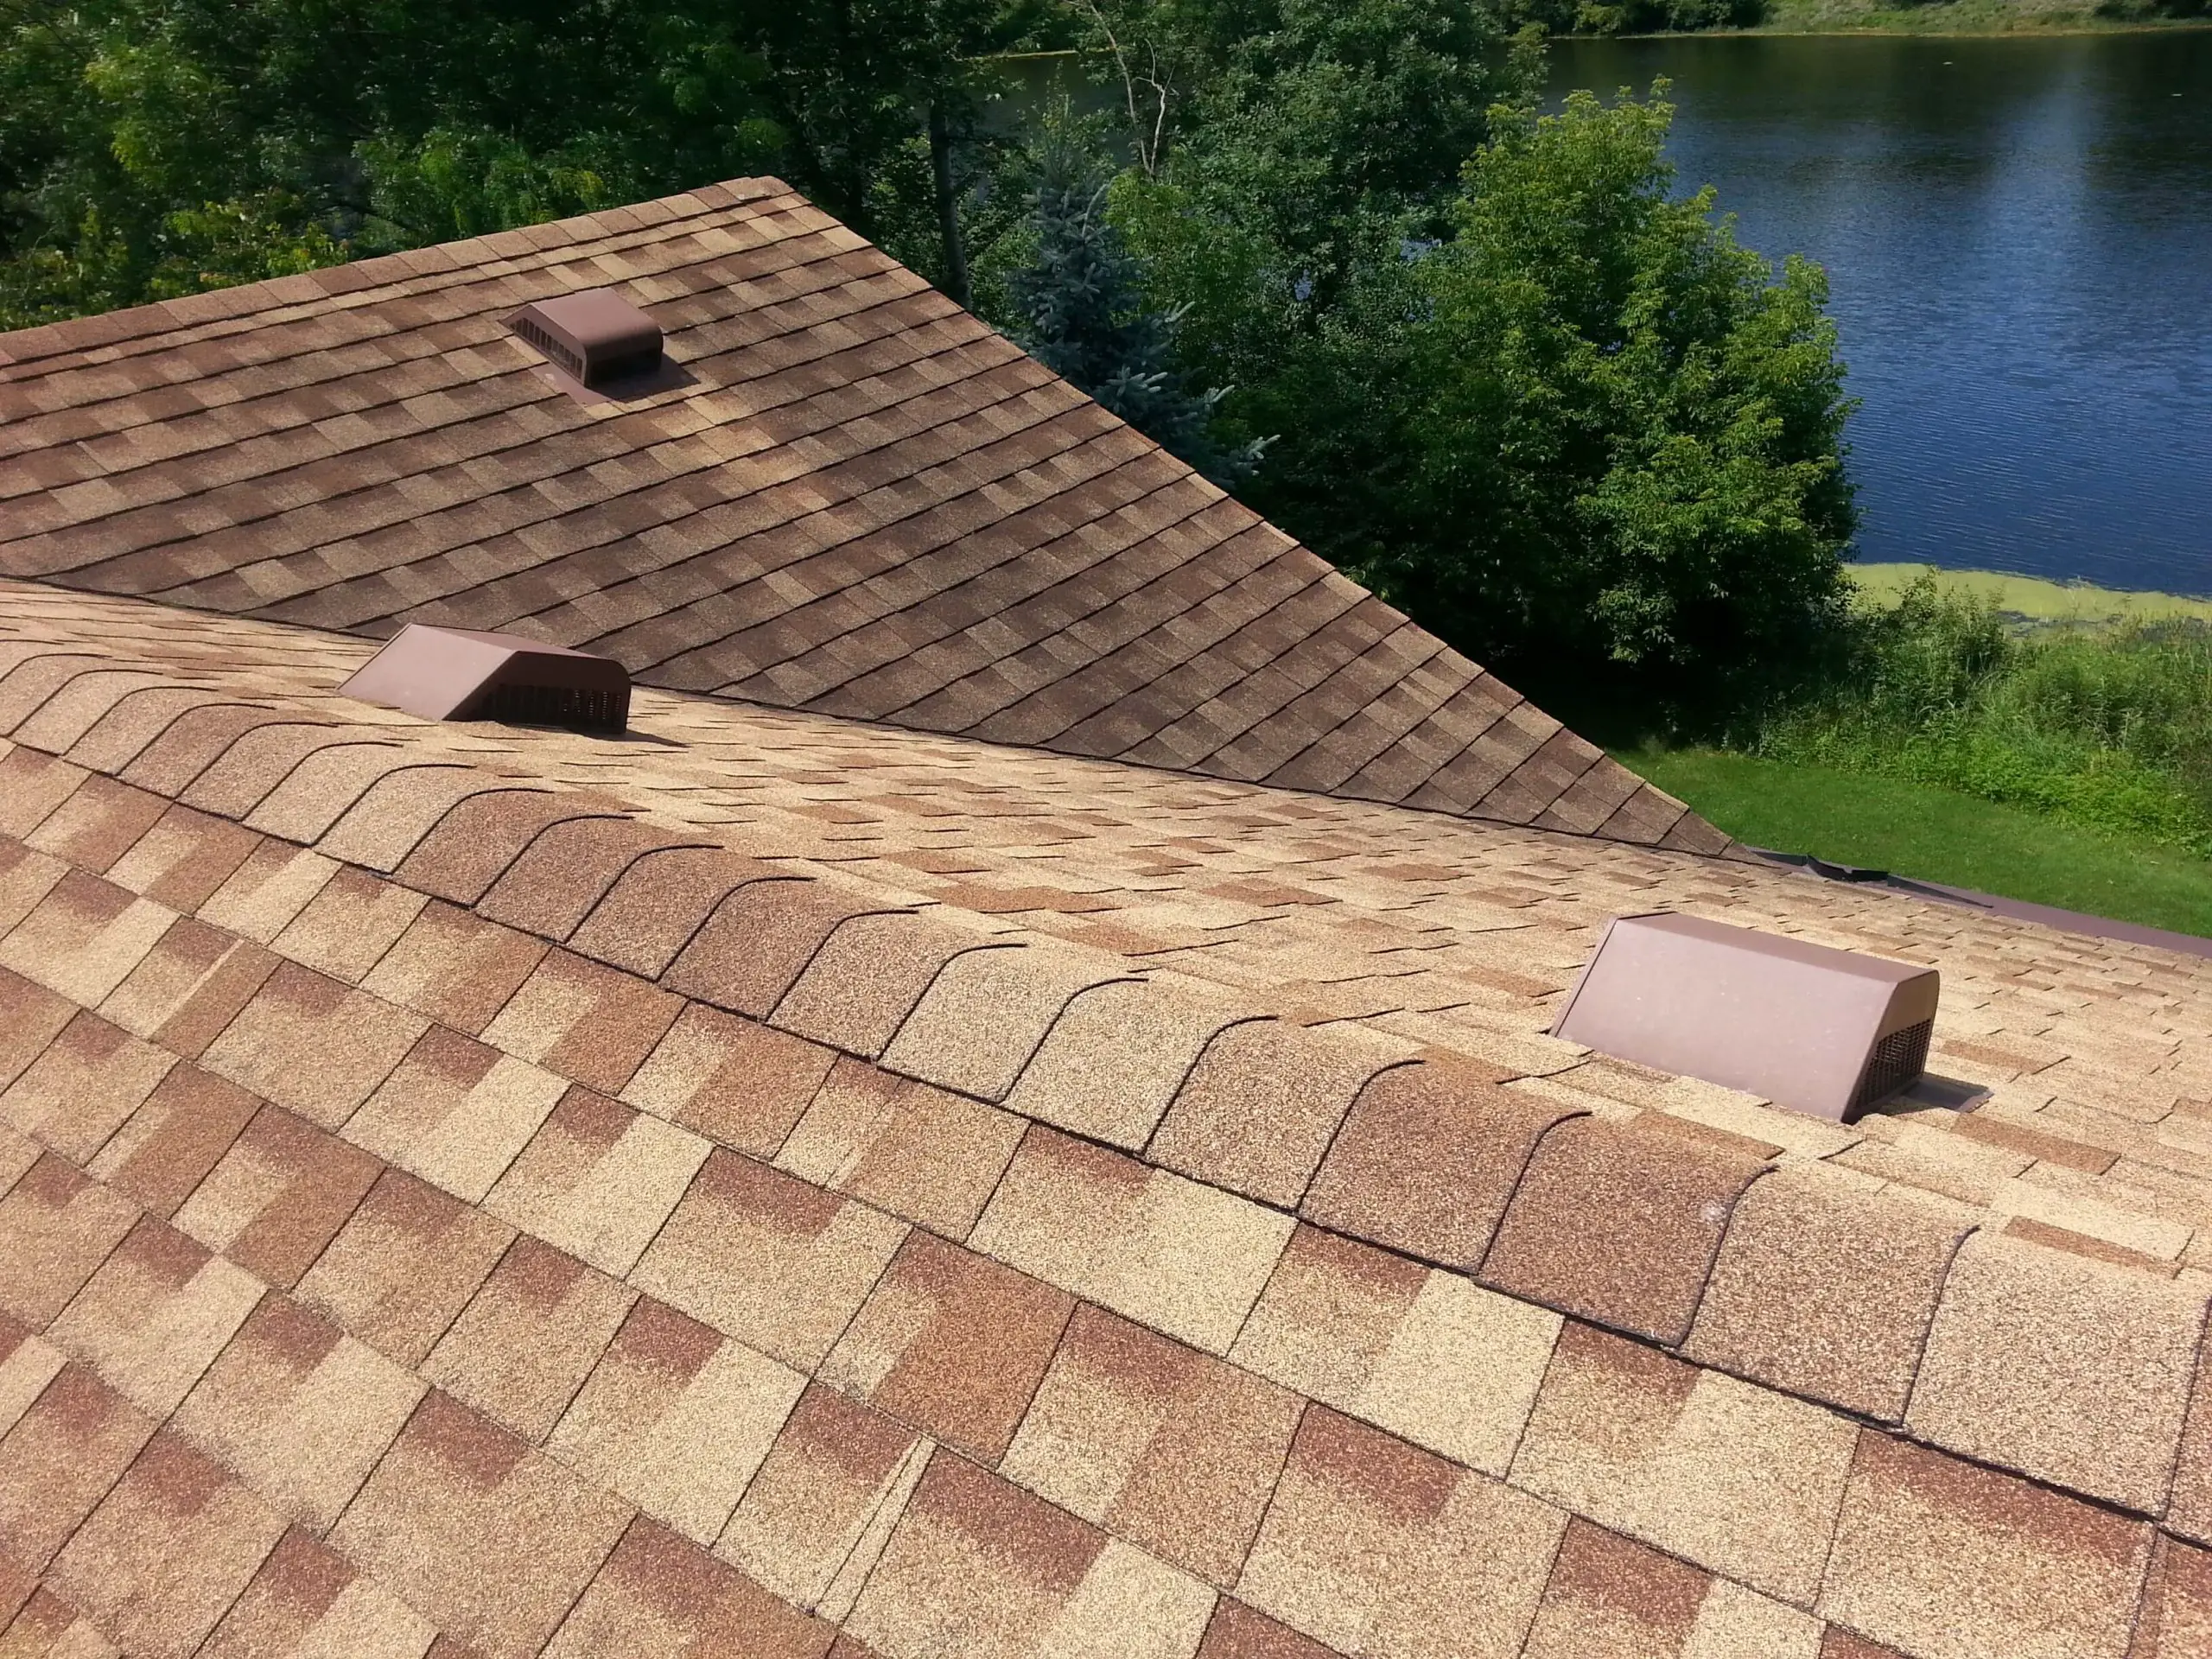 What type of shingle is best?